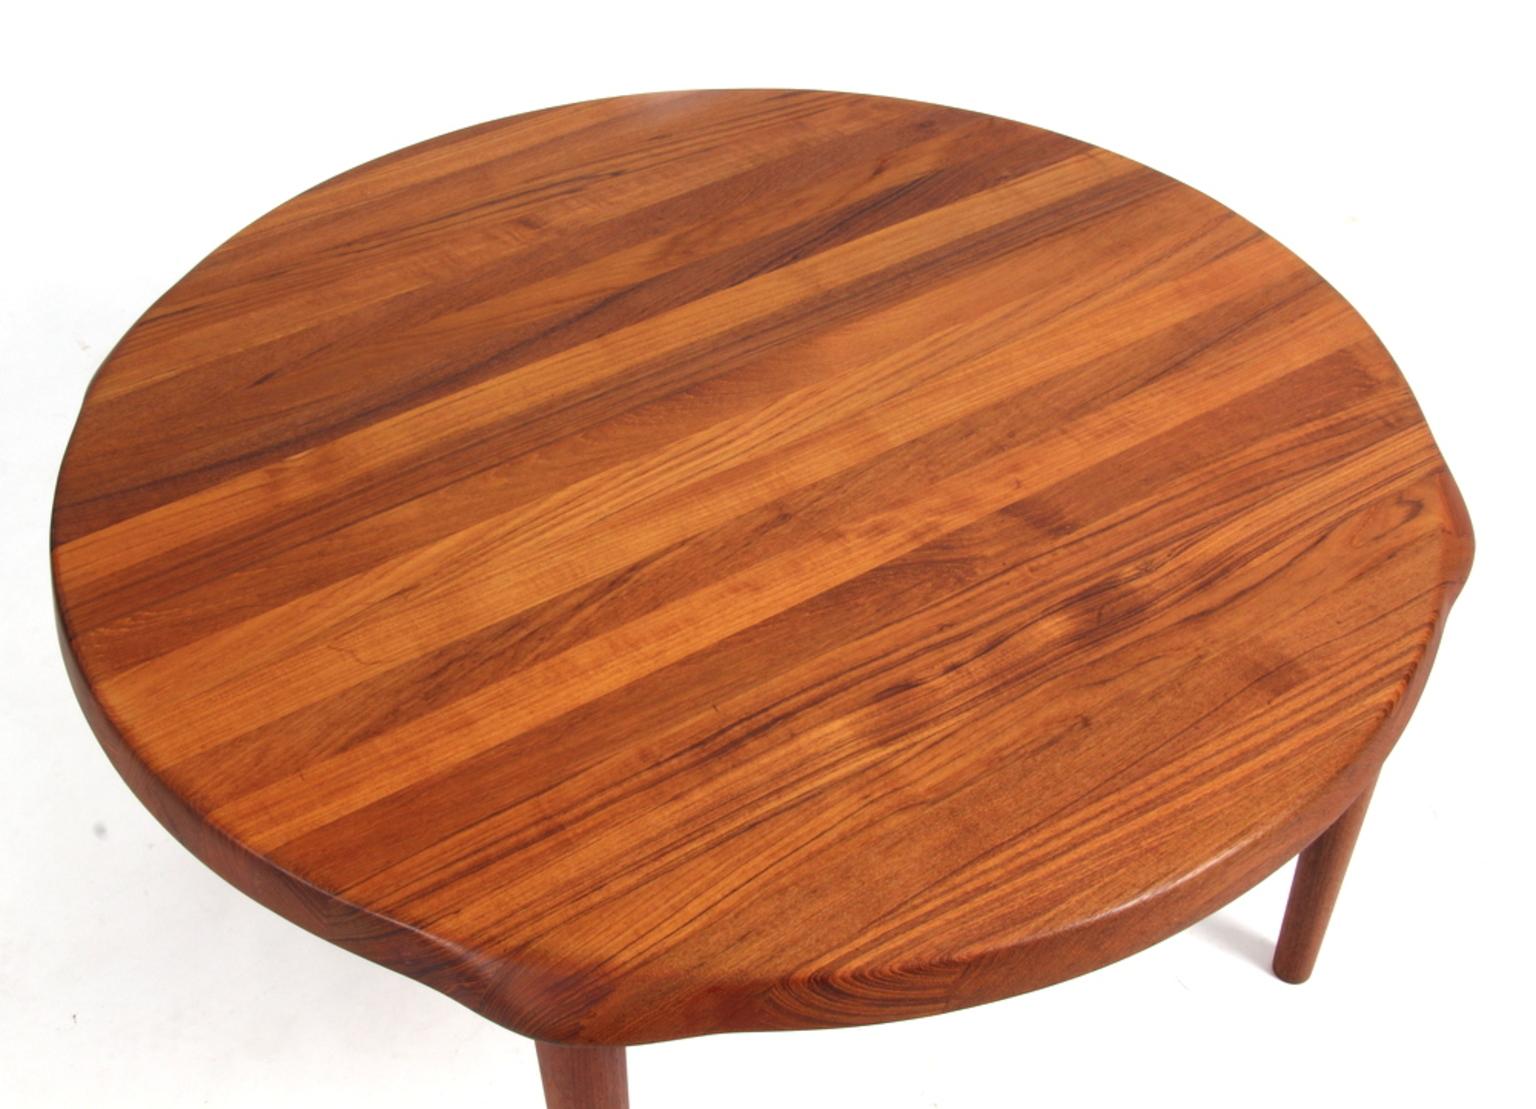 Very nice coffee table by John Bone for Mikael Laursen, Denmark, 1960s. Massive teak wood plate with a very nice edge.

The legs can be unscrewed.

The organic form and the extra thick solid teak plate make this table standout from the other